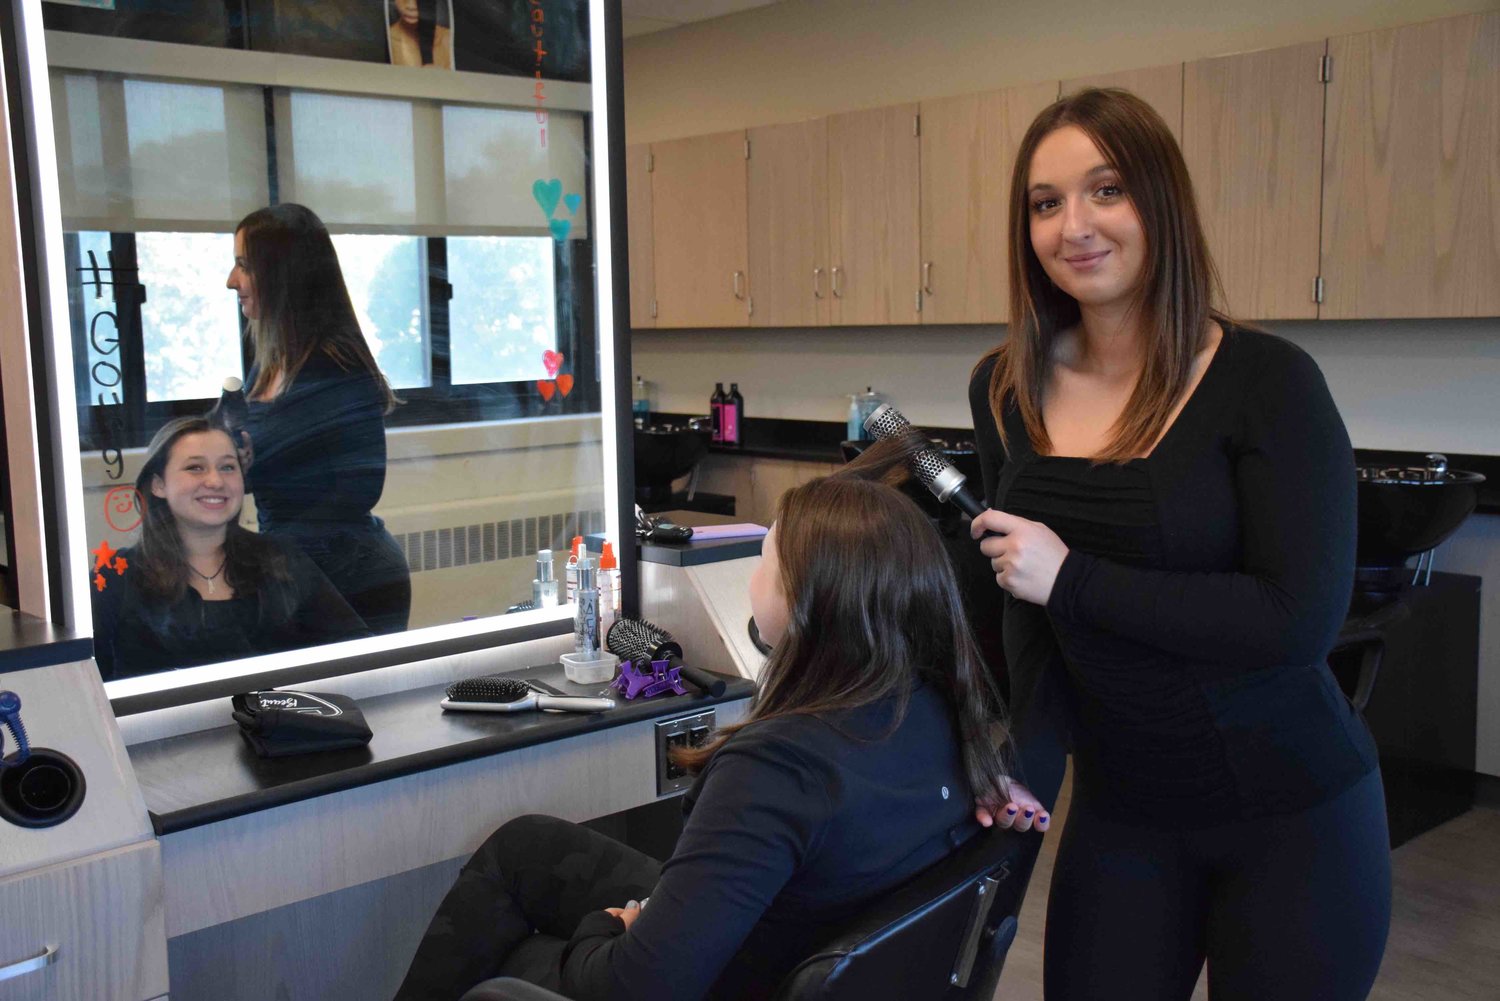 The Bellmore-Merrick Central High School District’s cosmetology program celebrated the grand opening of its new salon suite last month, the centerpiece of its cosmetology program. Vanessa Monteleone styled her sister Ashlee’s hair.